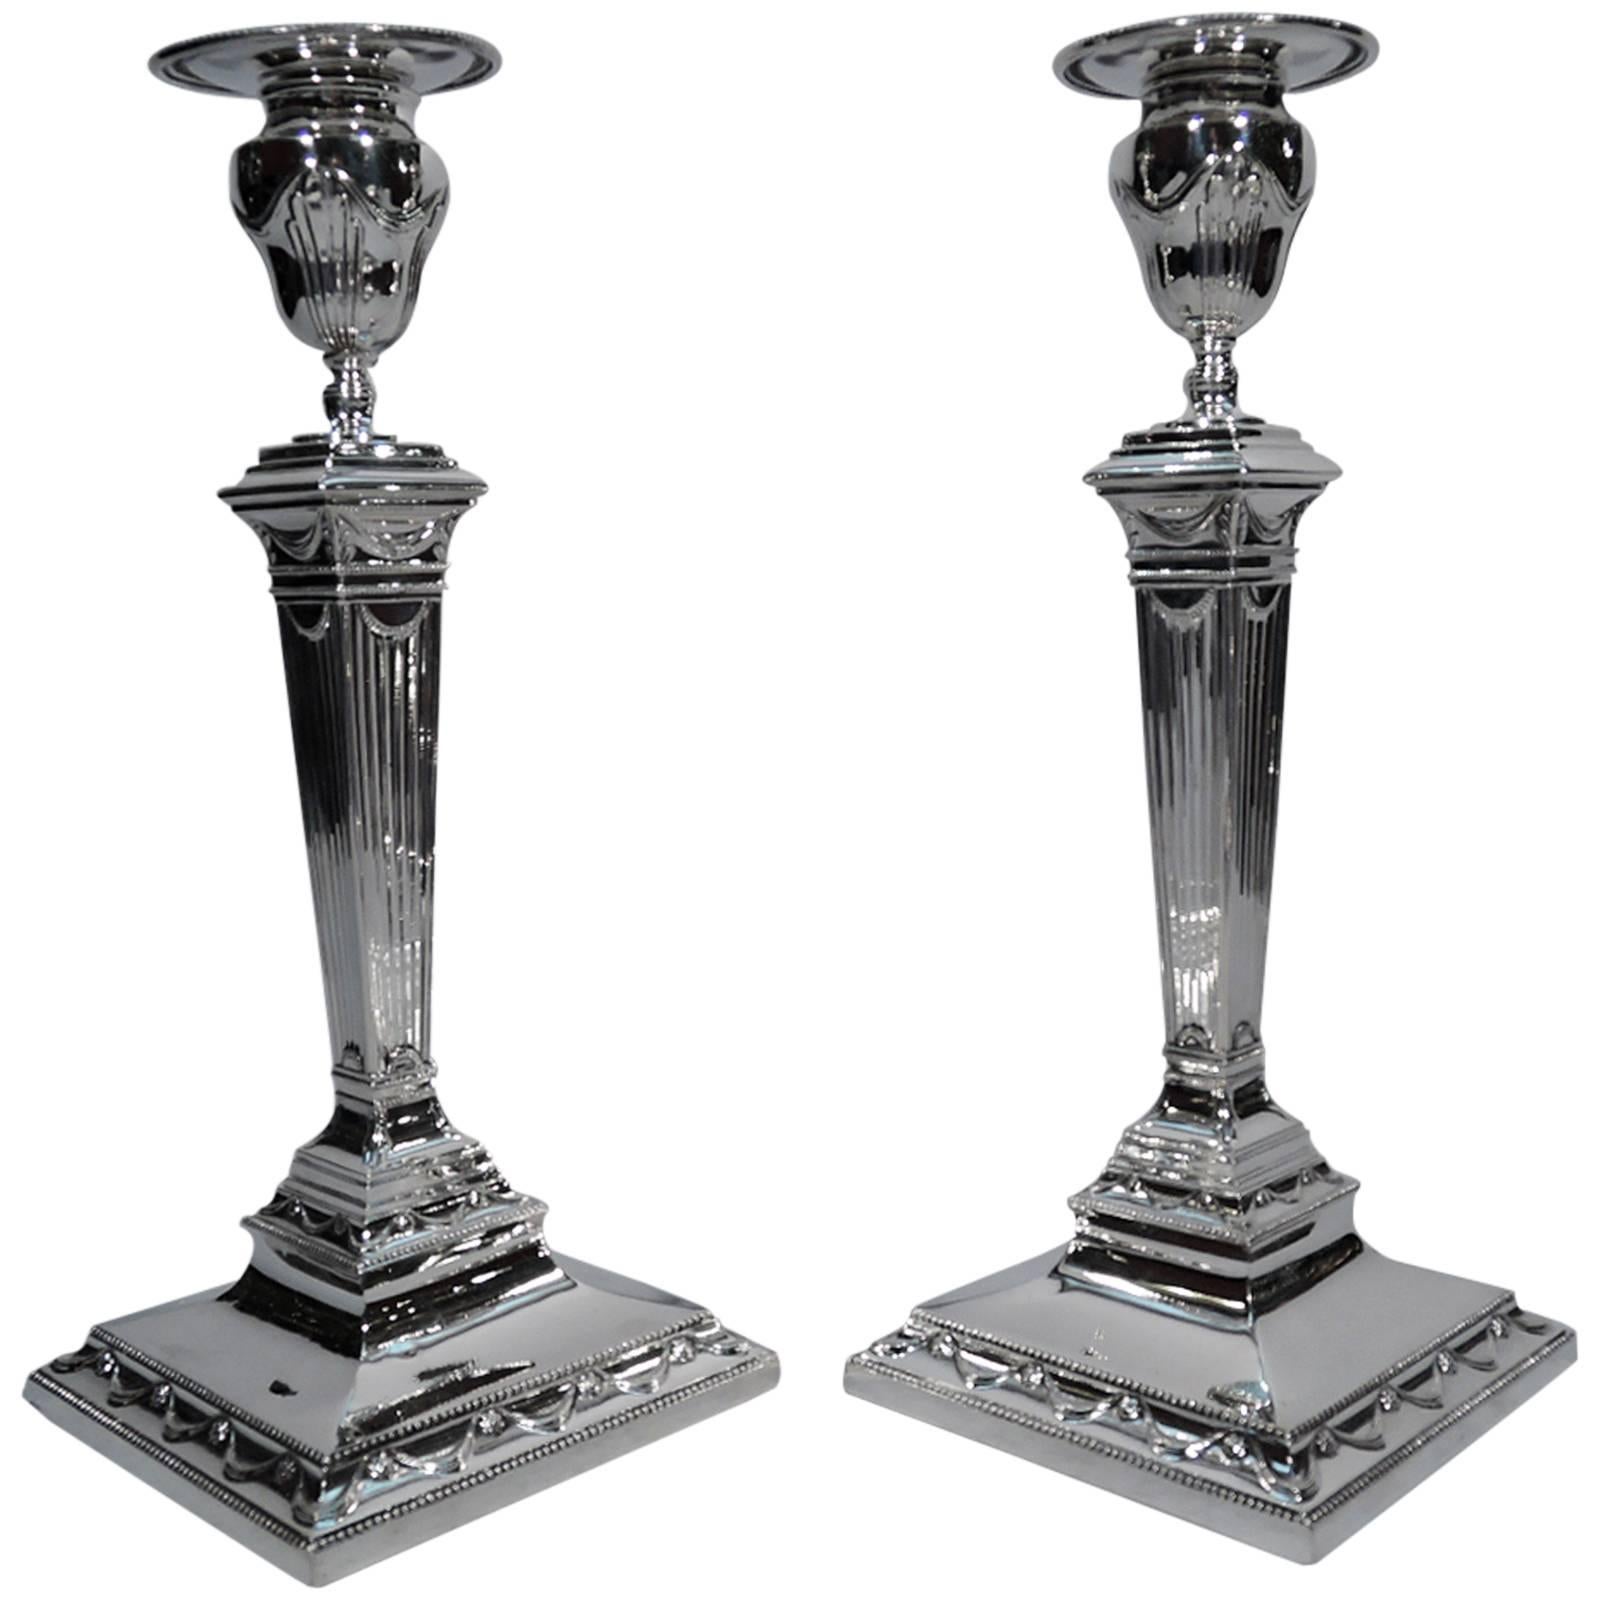 Tiffany Sterling Silver Candlesticks after English Neoclassical